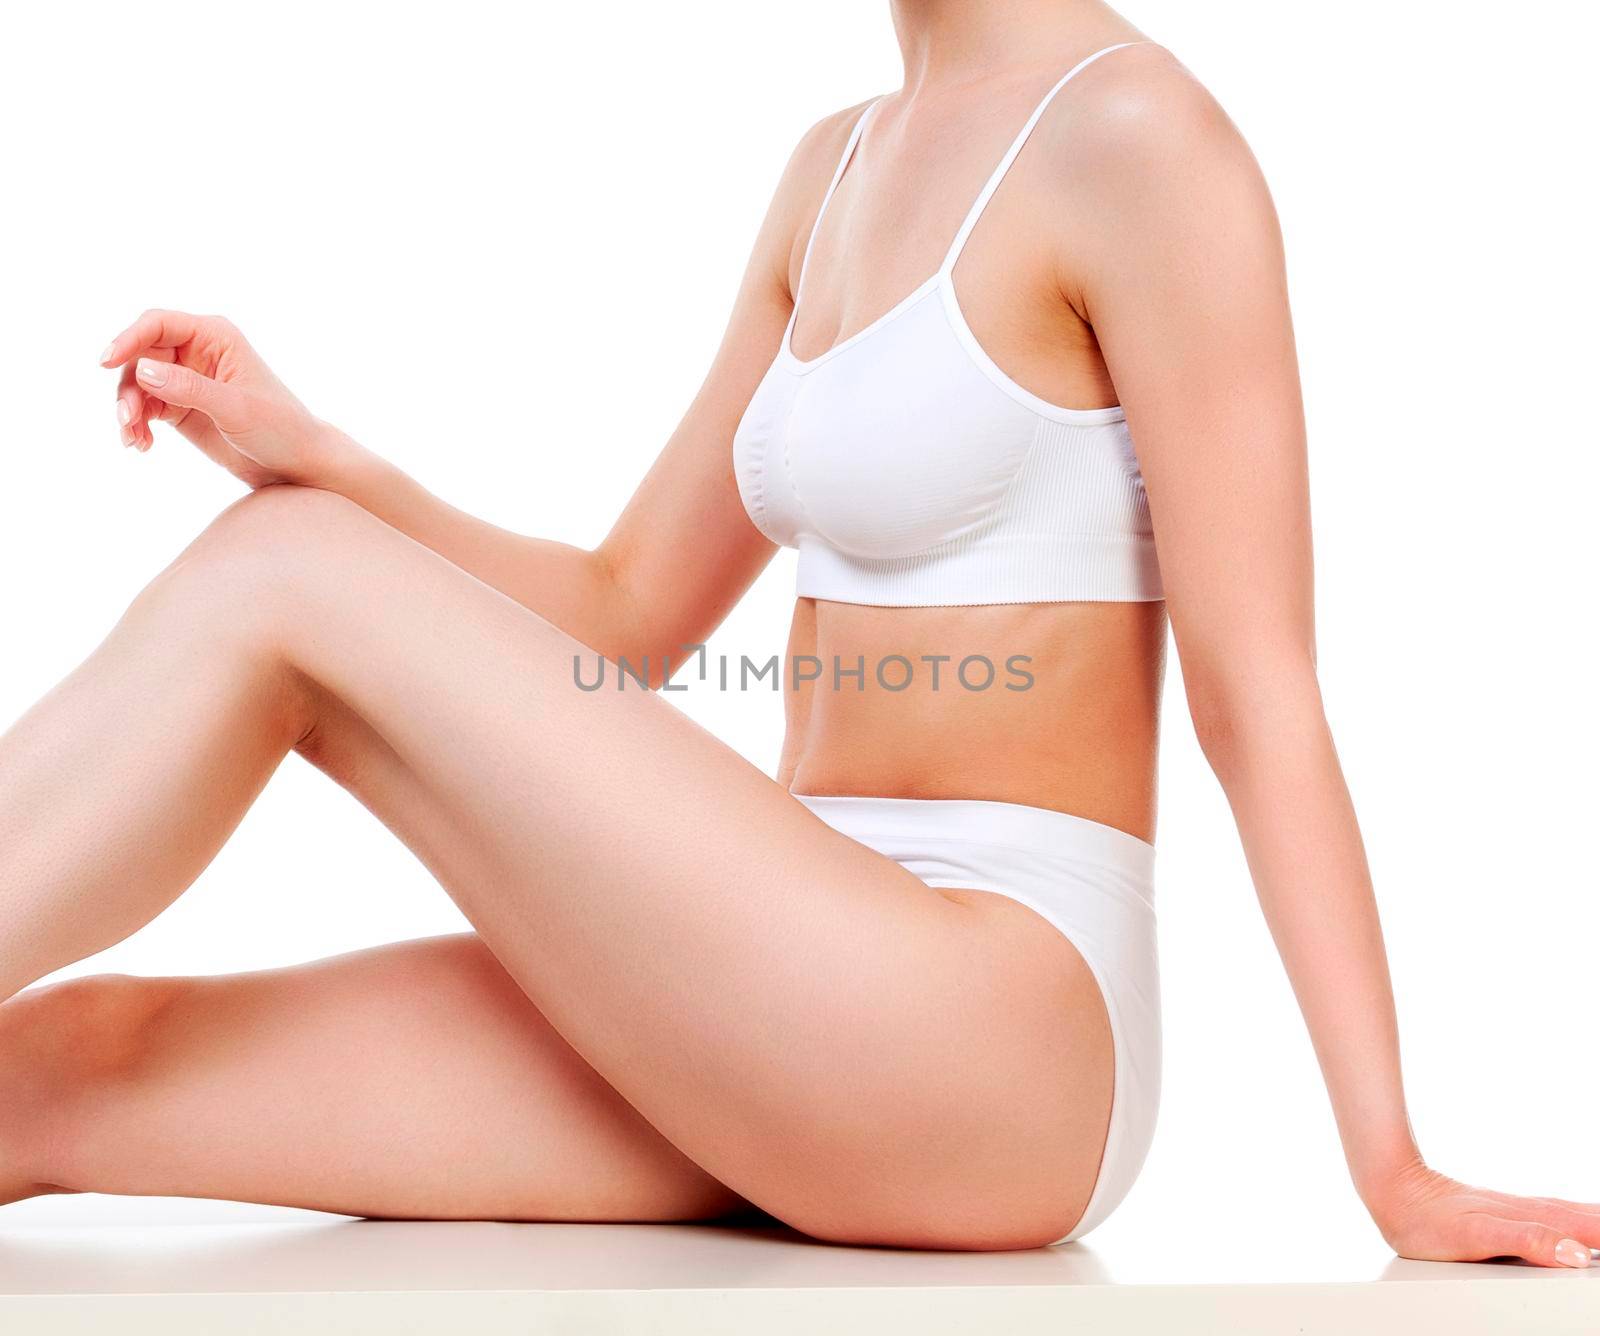 Pretty woman with slim beautiful body sitting against white background, isolated